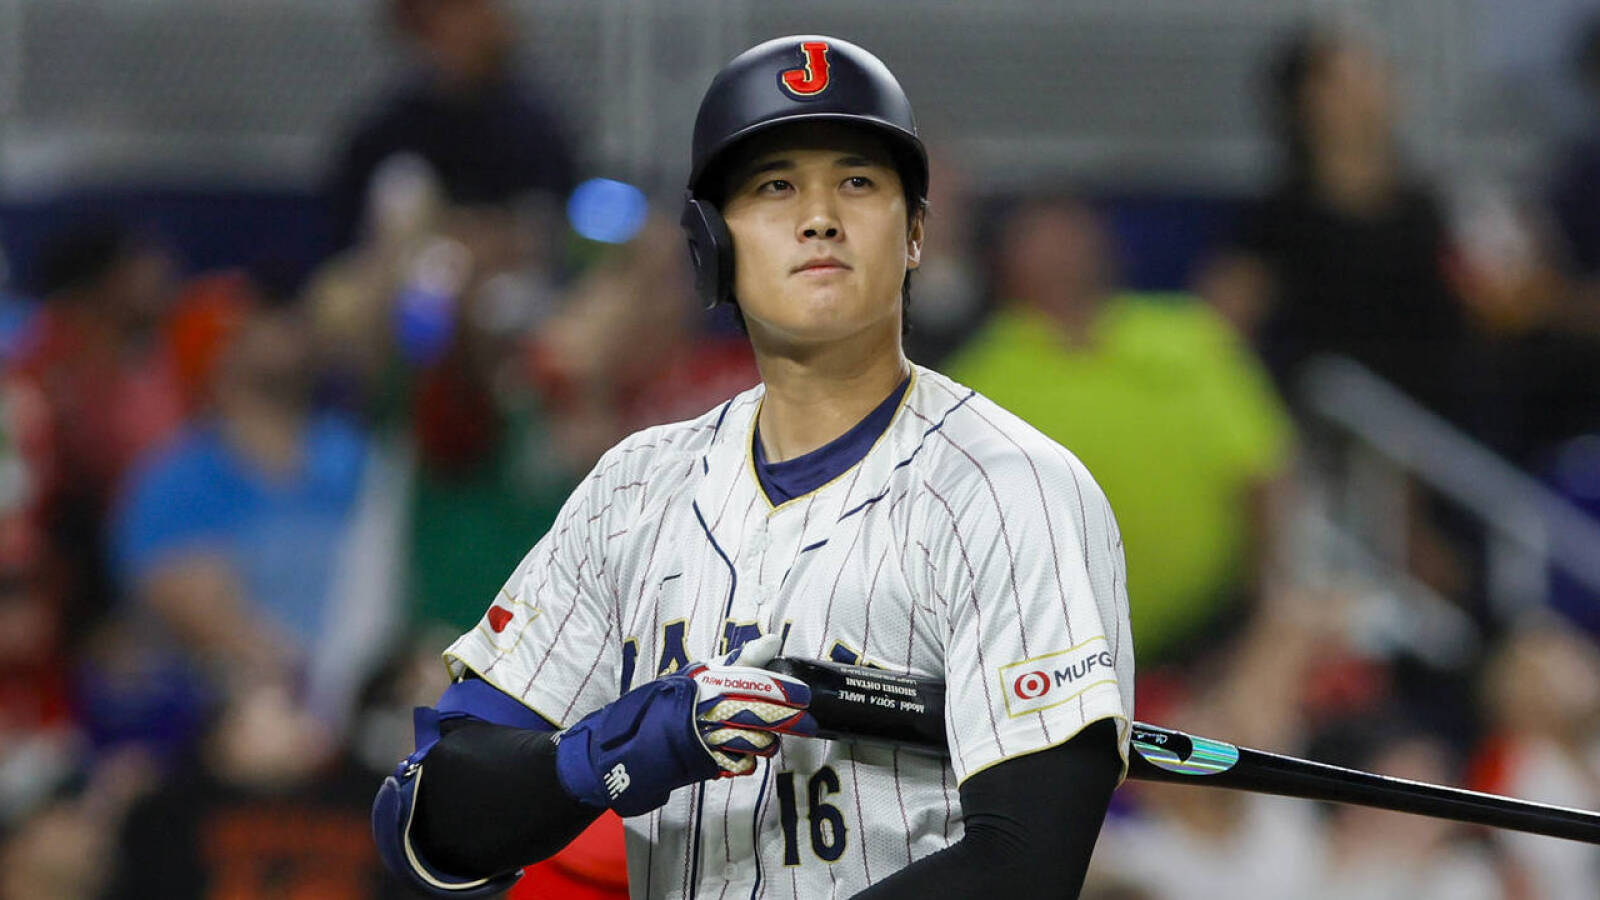 Angels' Shohei Ohtani may earn even more money after WBC dominance